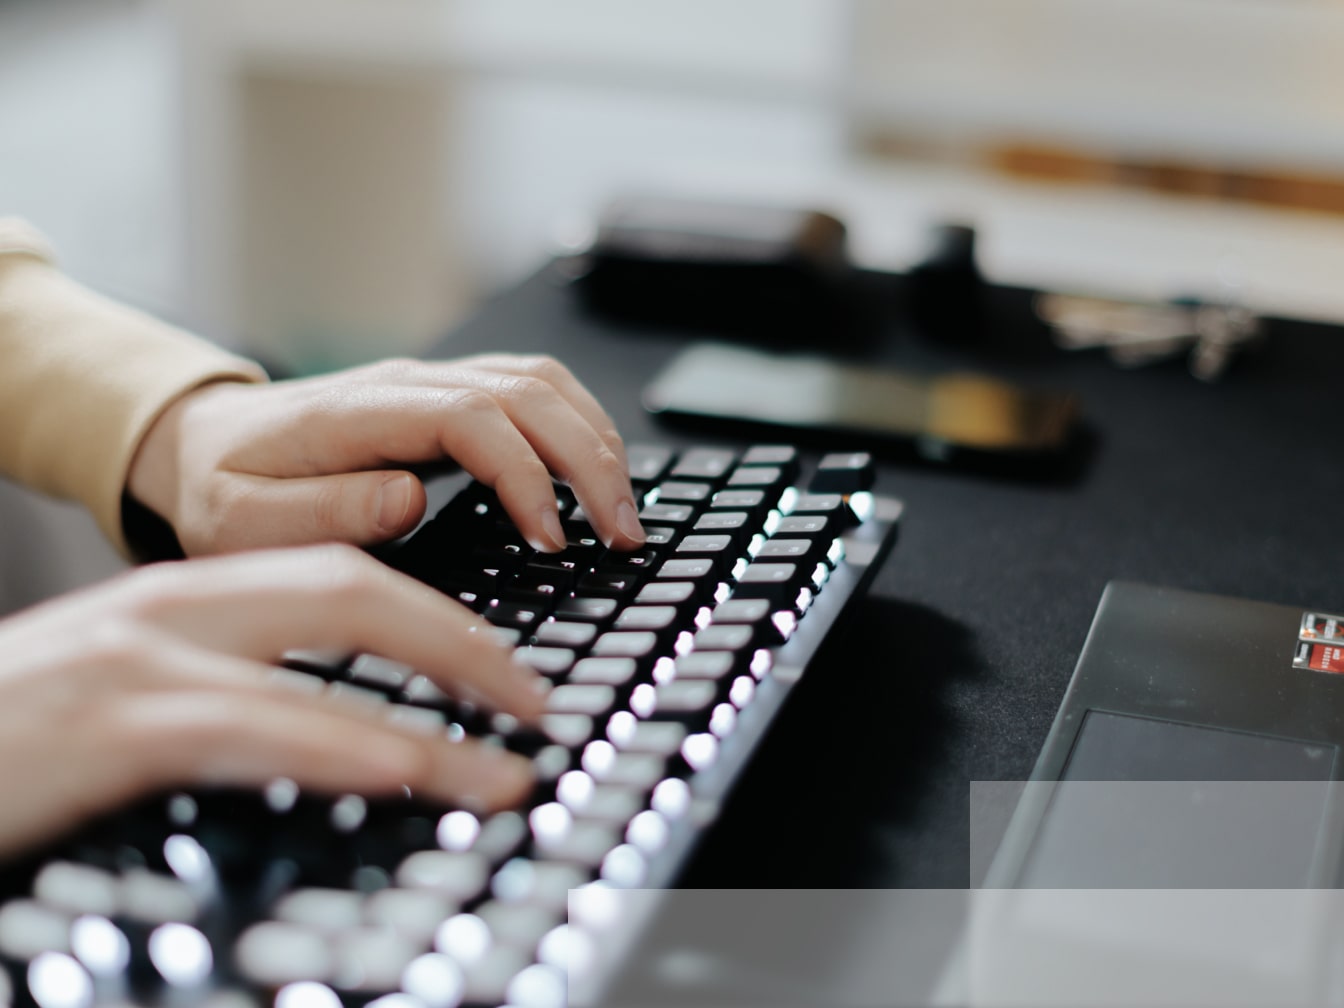 a person is typing on a computer keyboard.